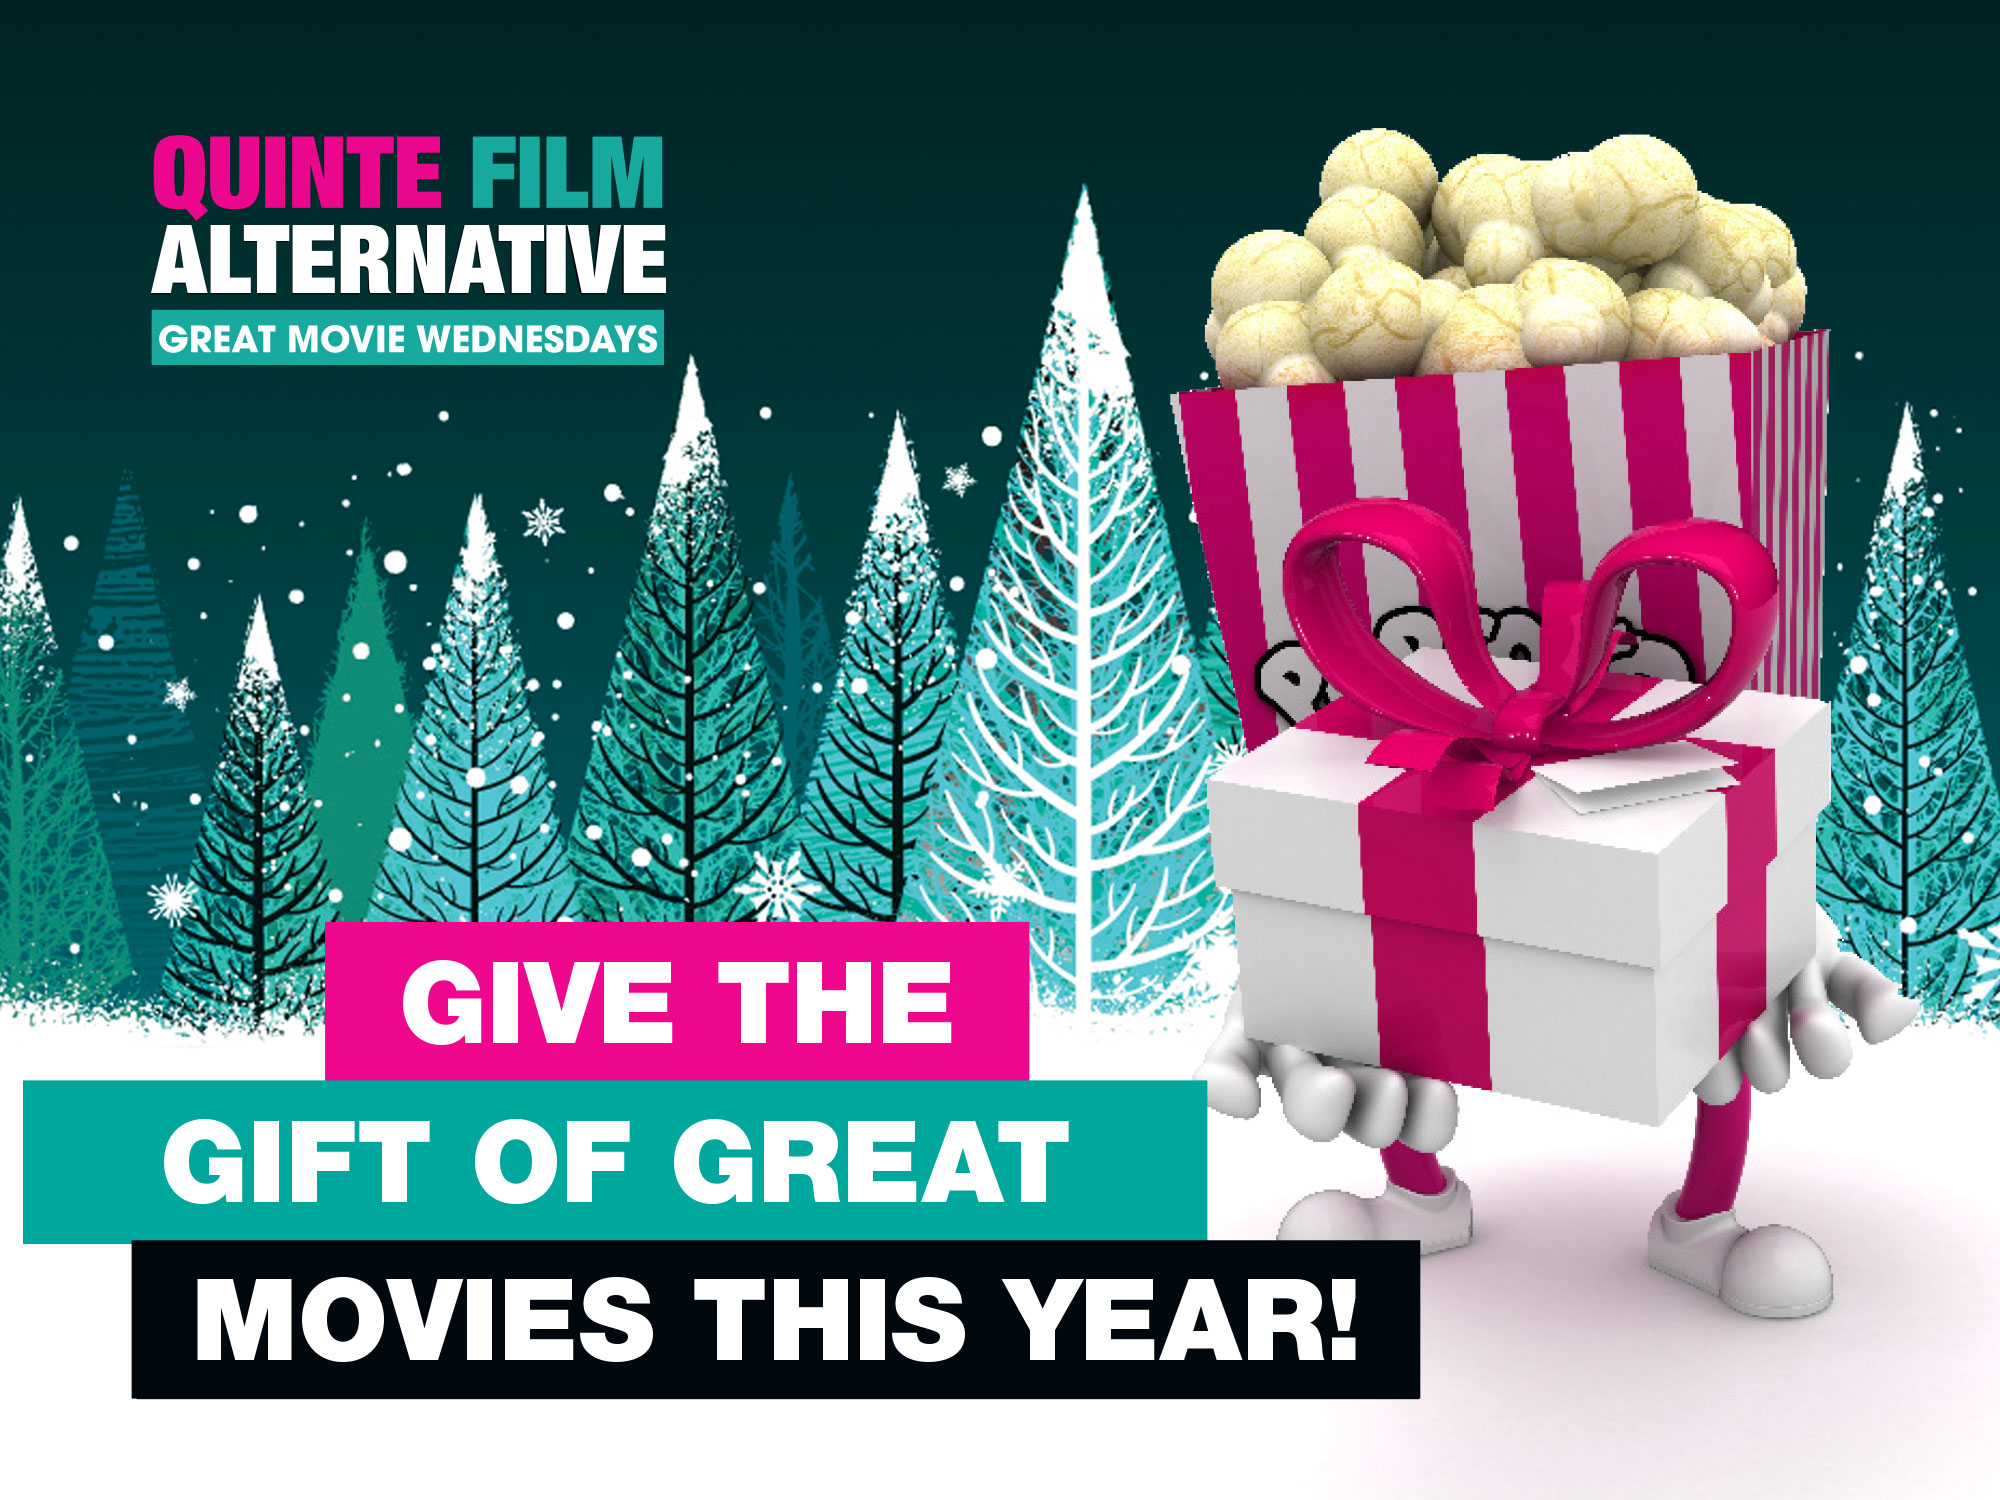 Give the Gift of GREAT MOVIES